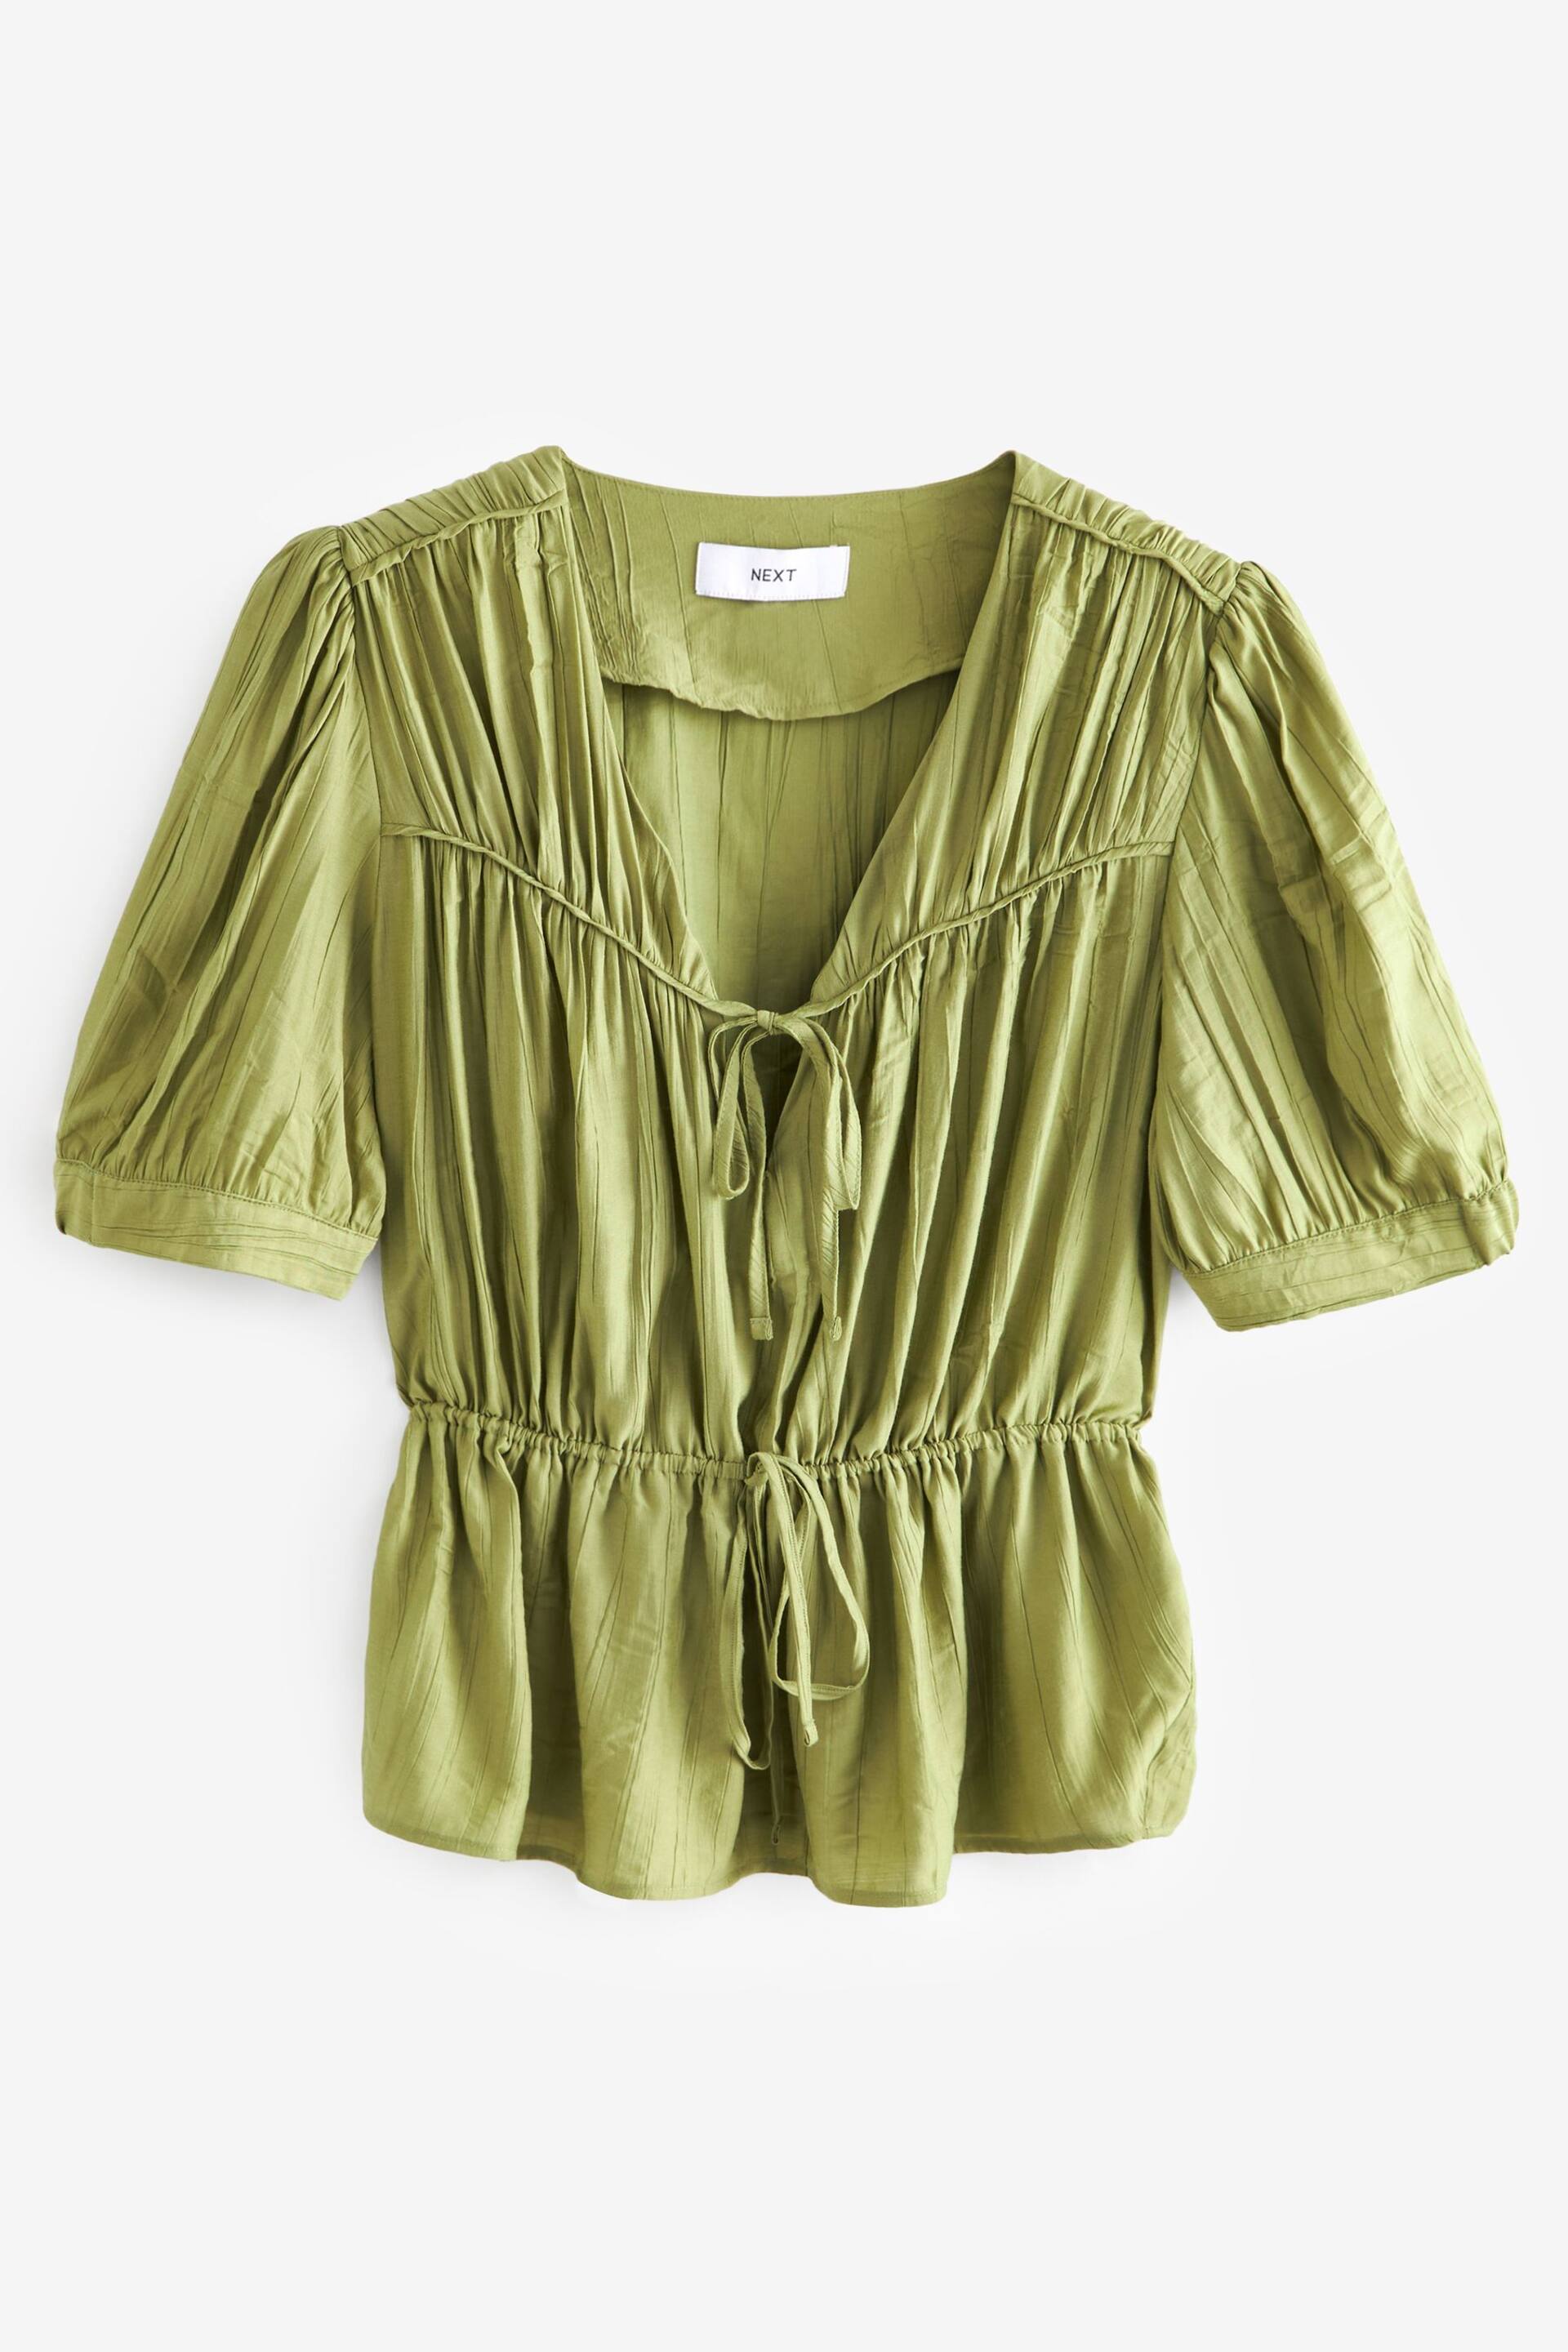 Green Tie Front Tiered Textured Short Sleeve Blouse - Image 5 of 6